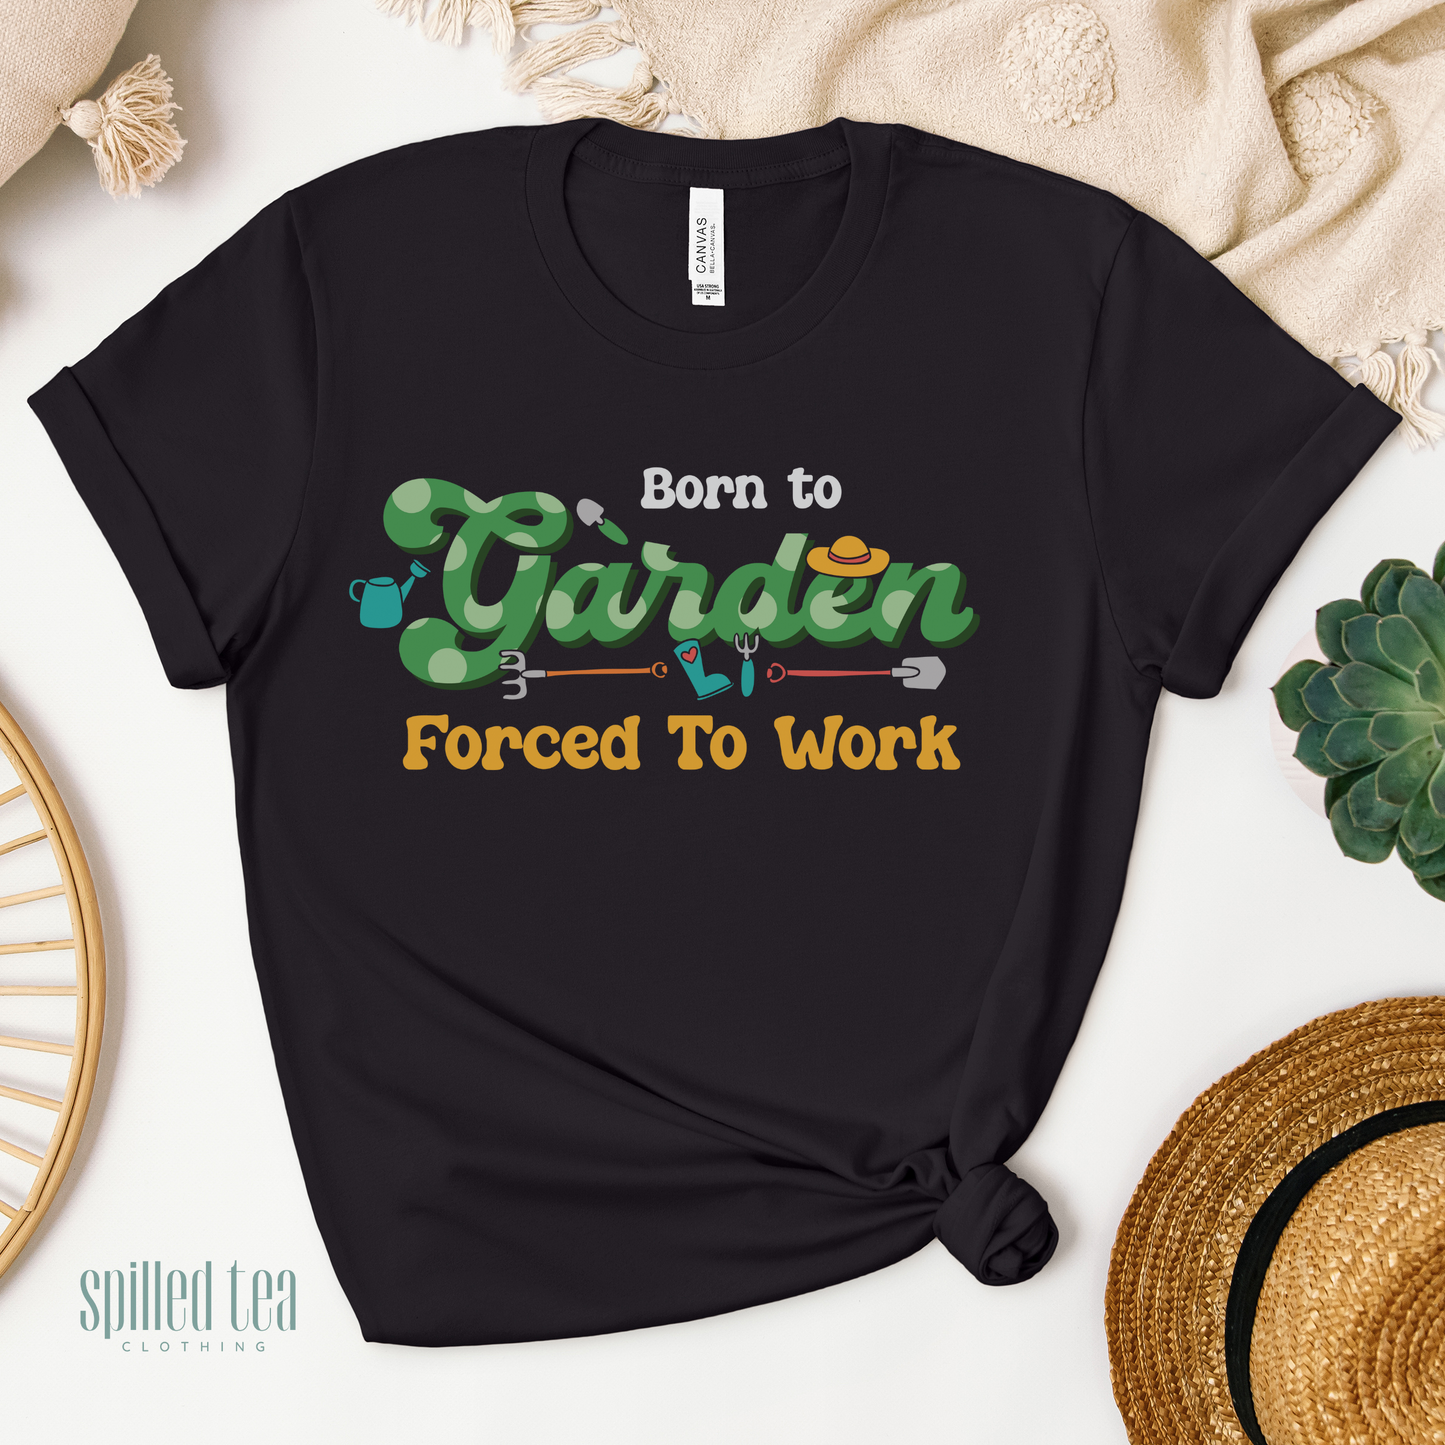 Born To Garden, Forced To Work T-Shirt